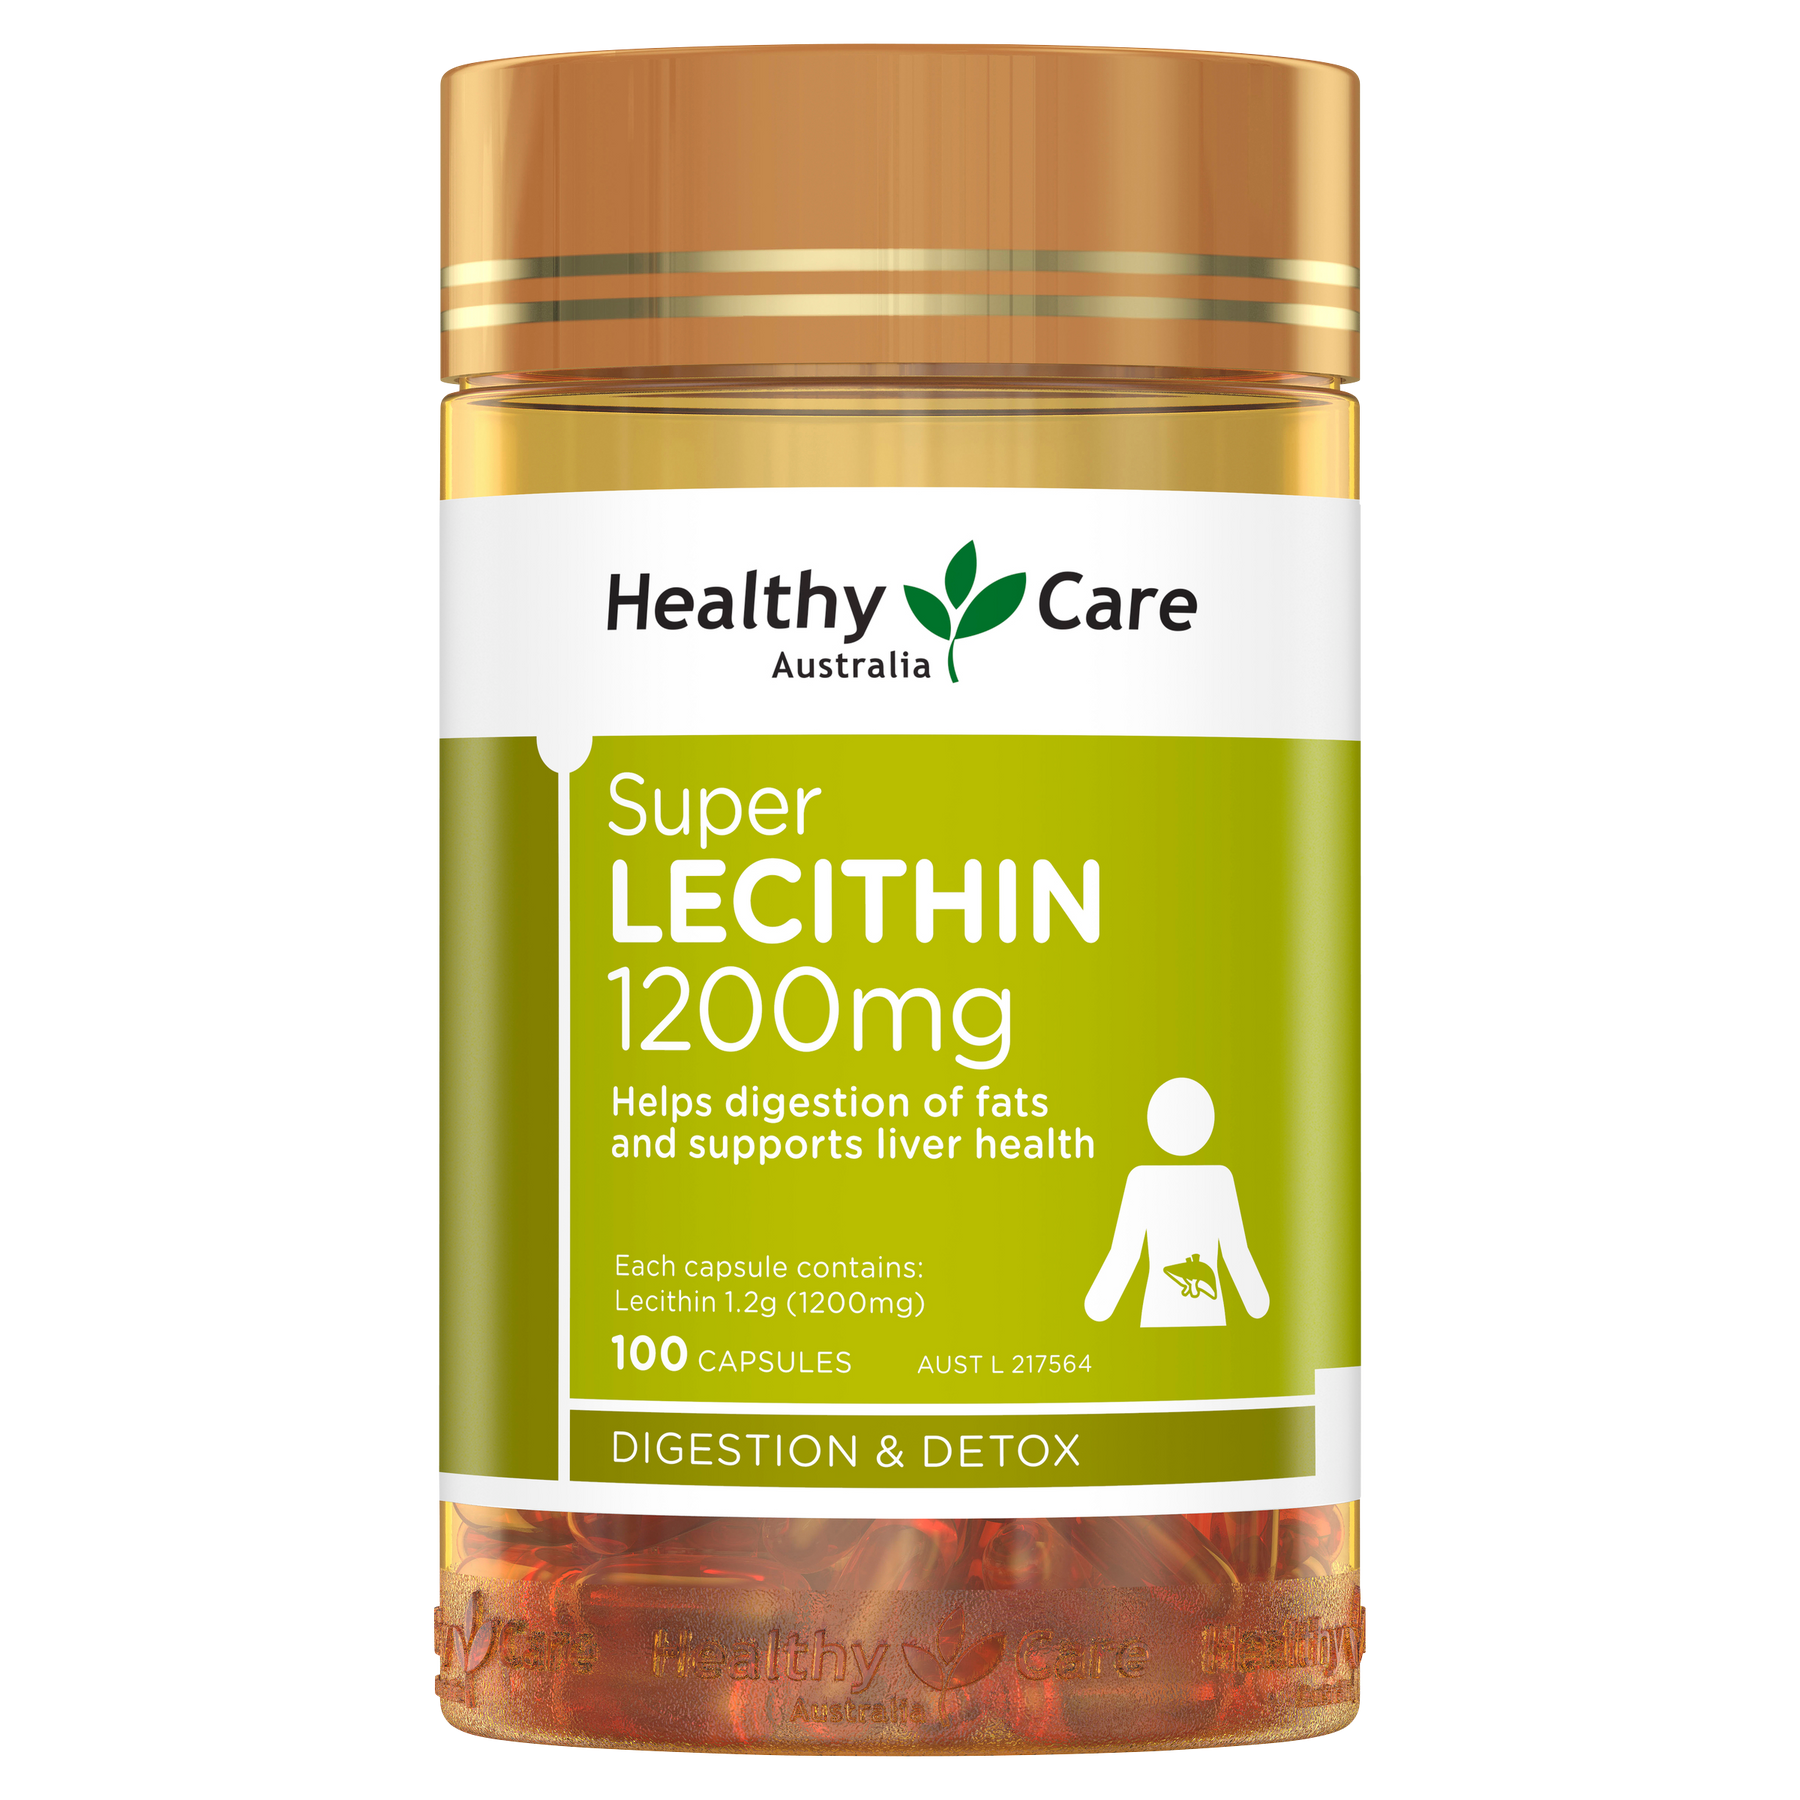 Healthy Care Super Lecithin 1200mg - 100 Capsules